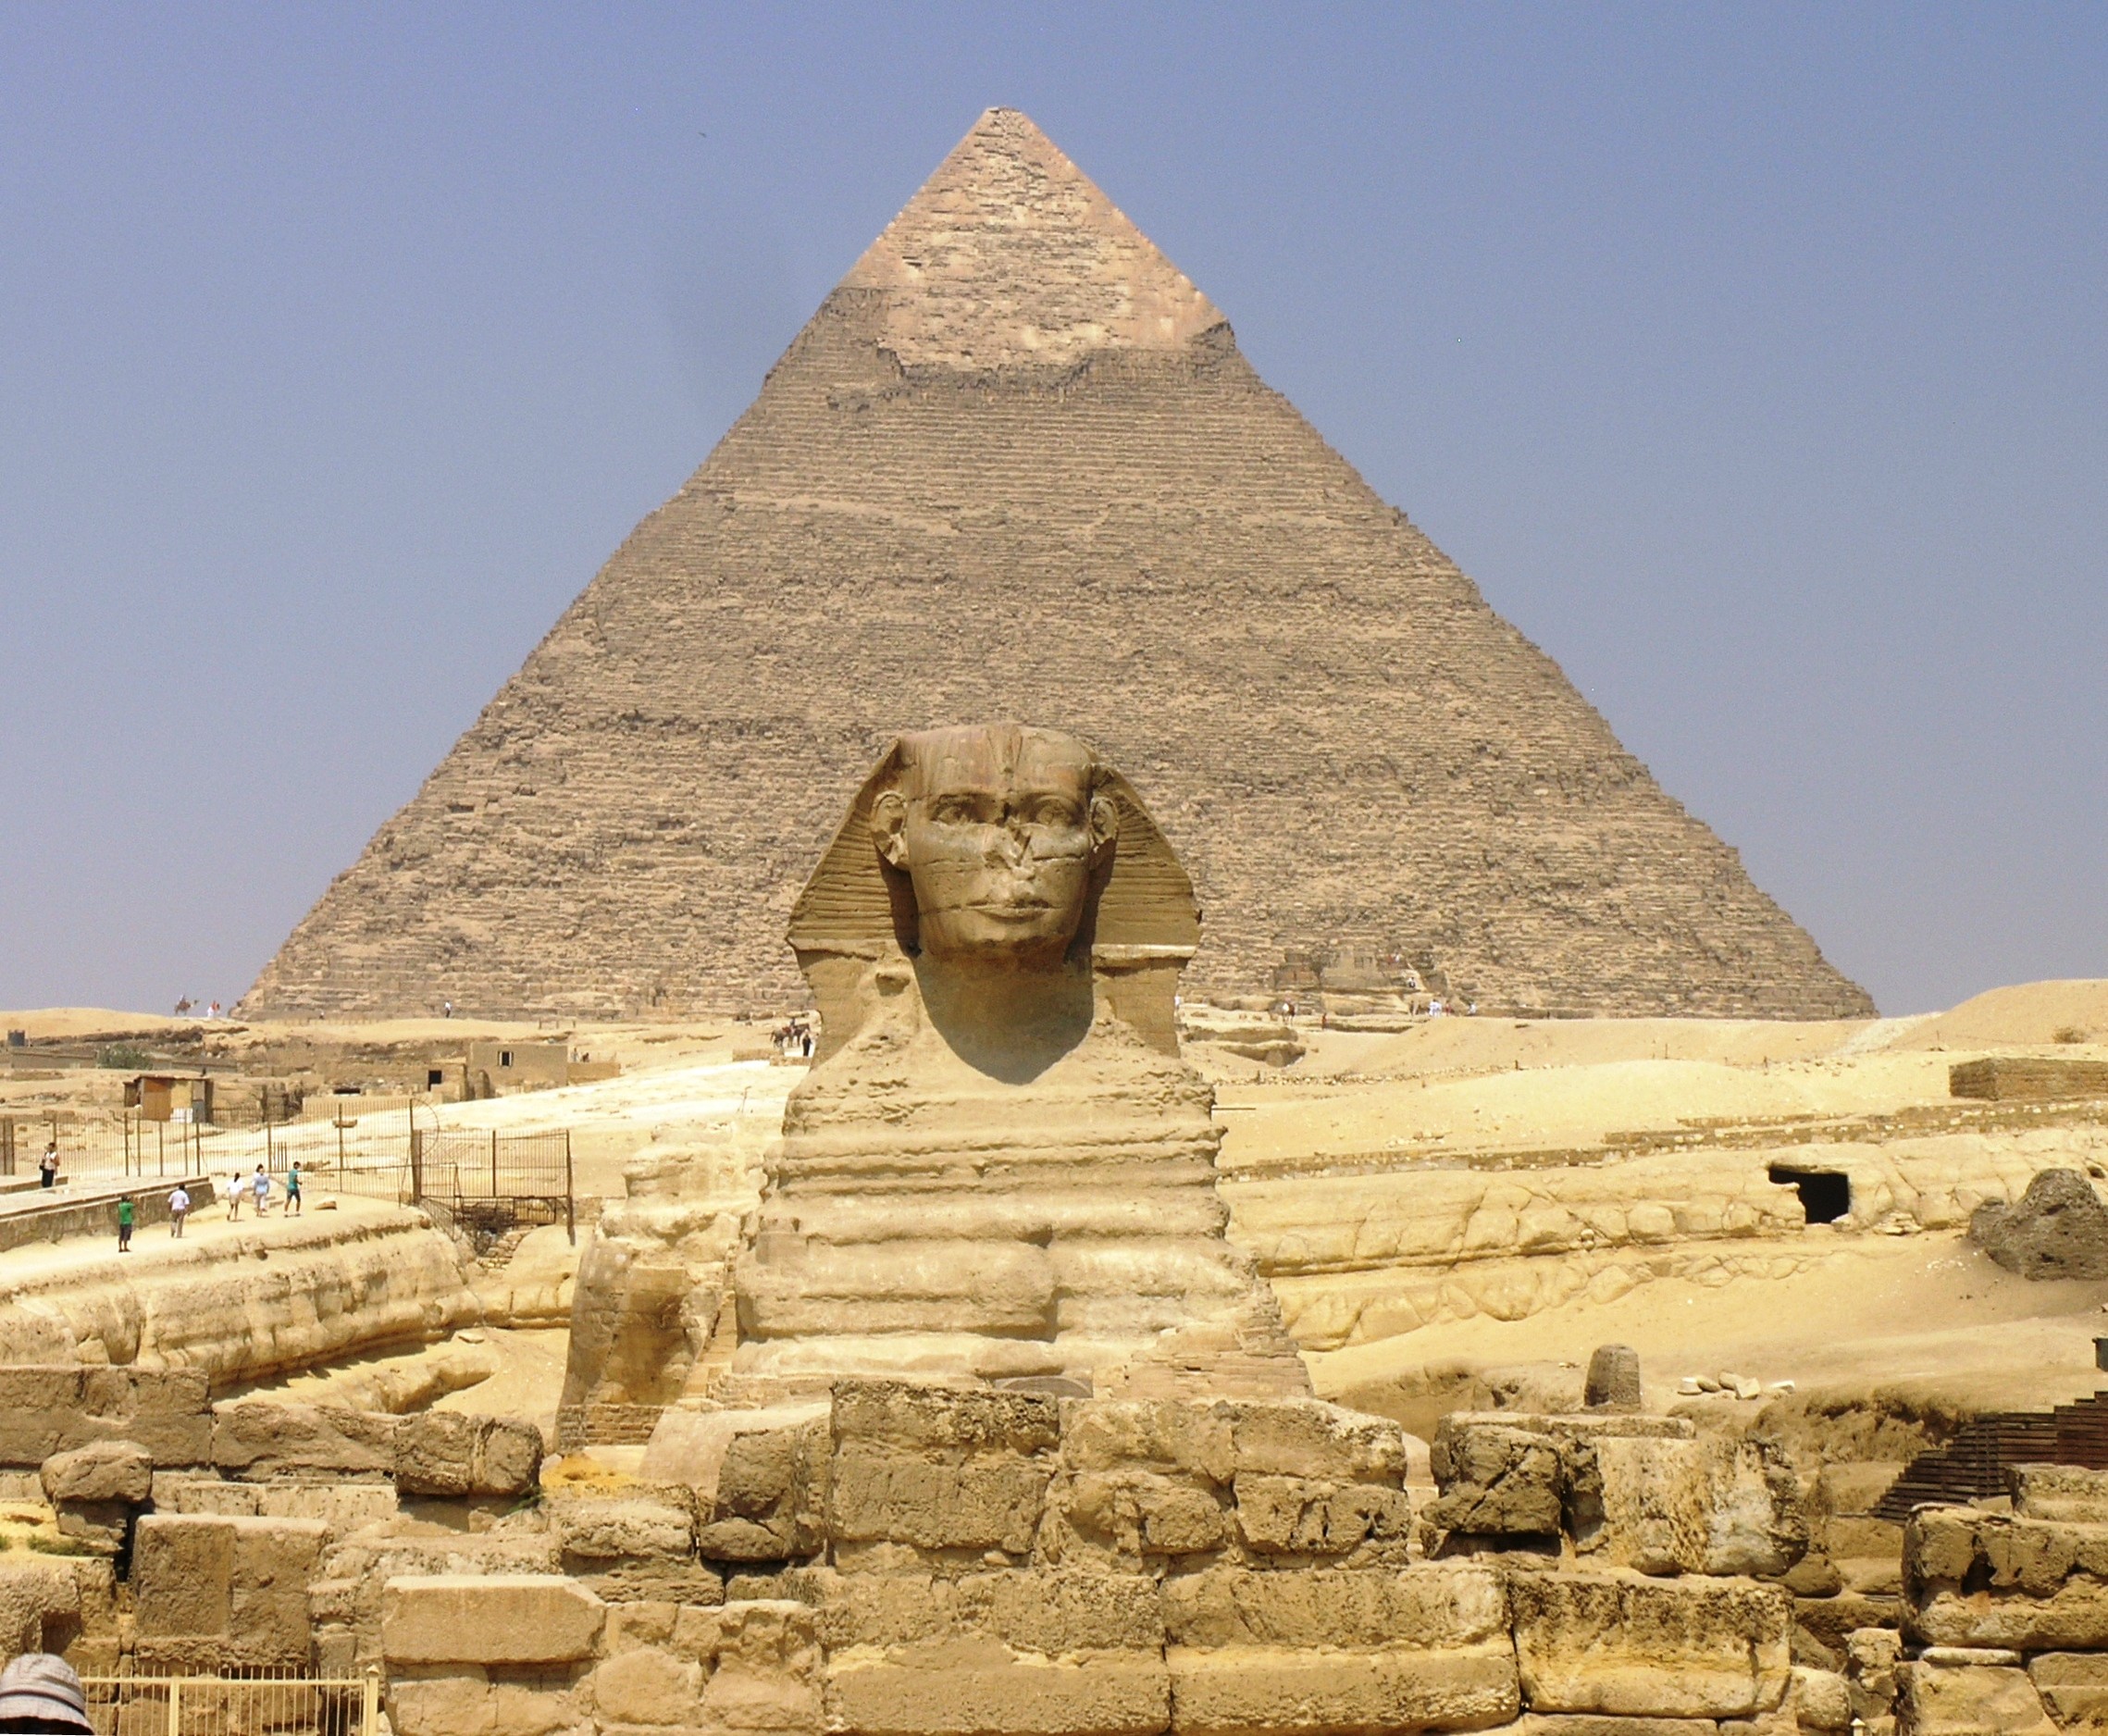 General 2278x1876 Pyramids of Giza Sphinx of Giza pyramid history Egypt ancient World Heritage Site landmark Africa